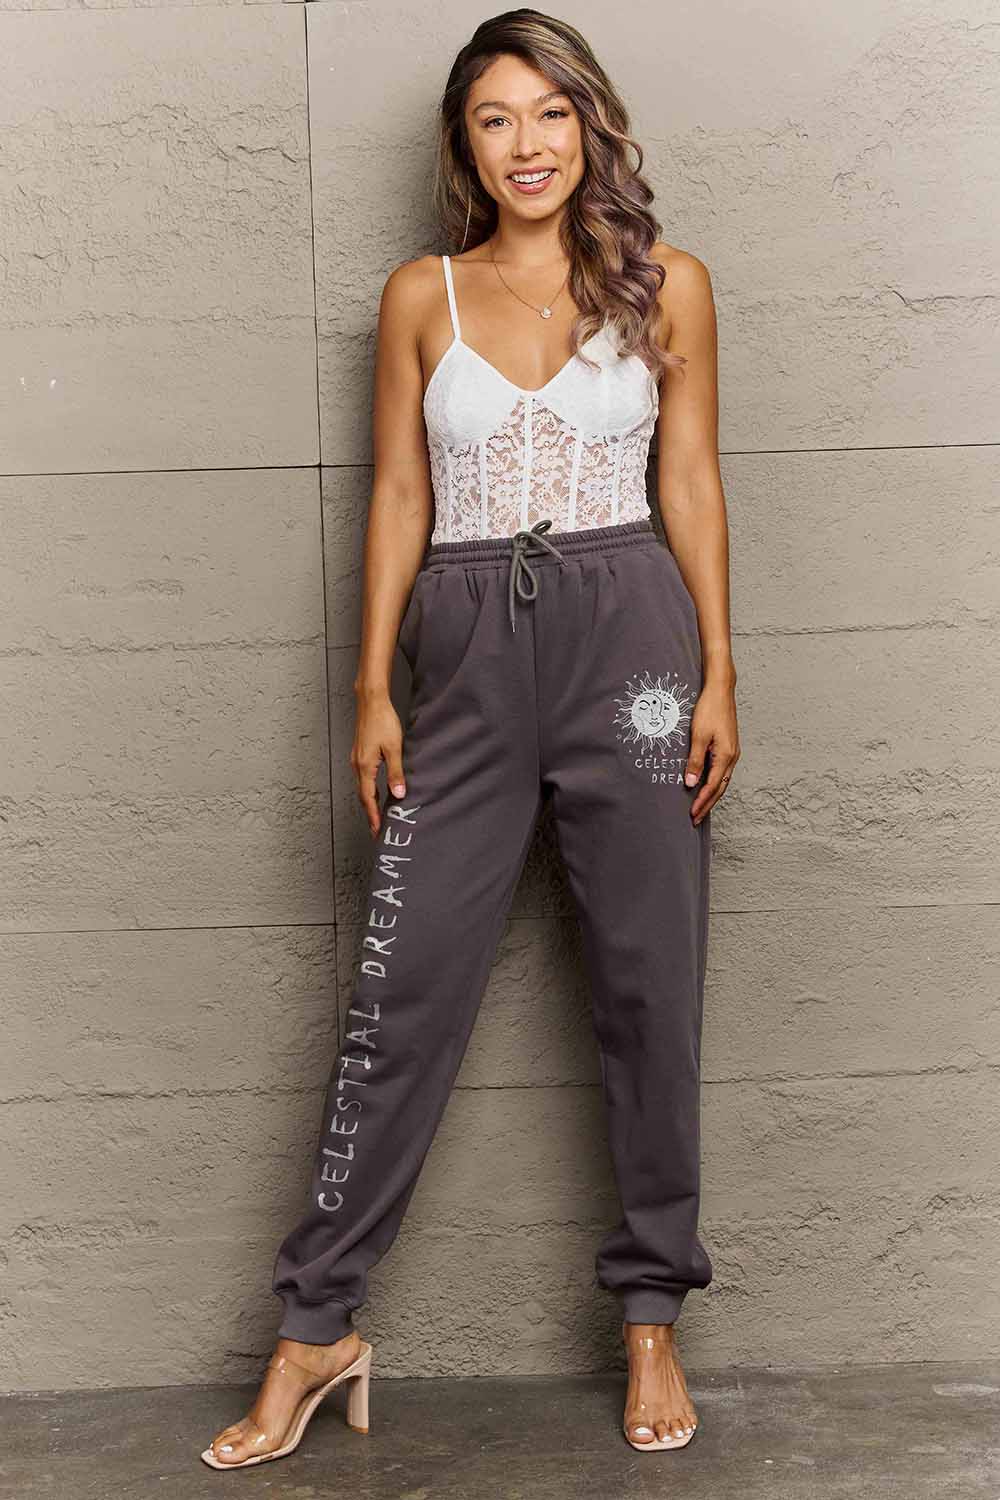 Rosy Brown Simply Love Full Size CELESTIAL DREAMER Graphic Sweatpants Sweatpants